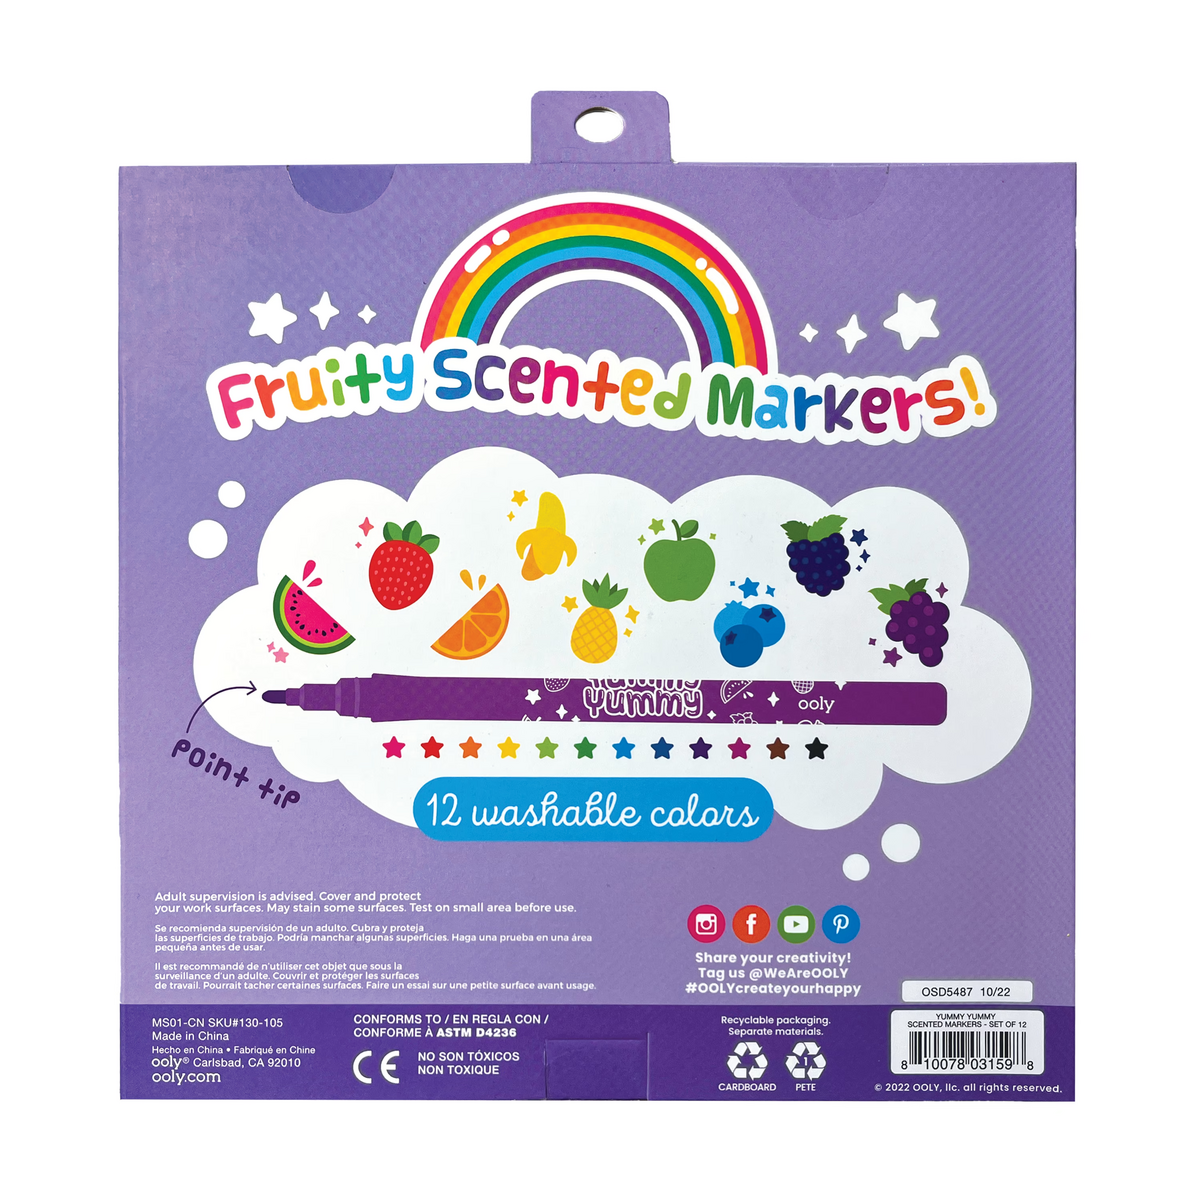 Ooly Yummy Yummy Scented Markers - Set of 12 - Suite Child